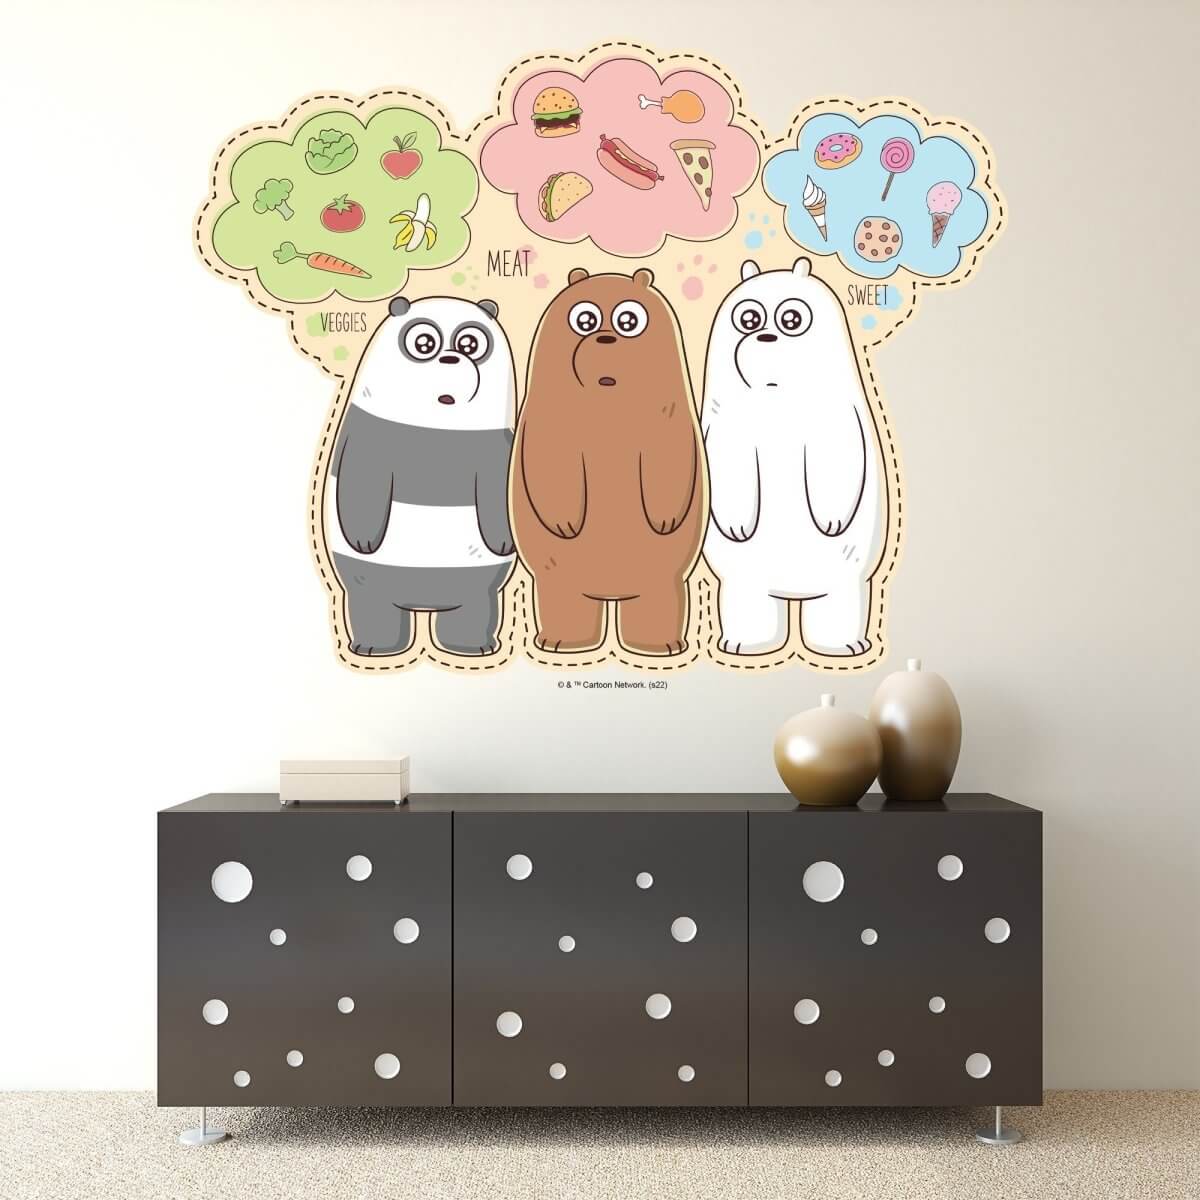 Kismet Decals Home & Room Decor We Bare Bears Favorite Foods Wall decal sticker - officially licensed - latex printed with no solvent odor - Kismet Decals